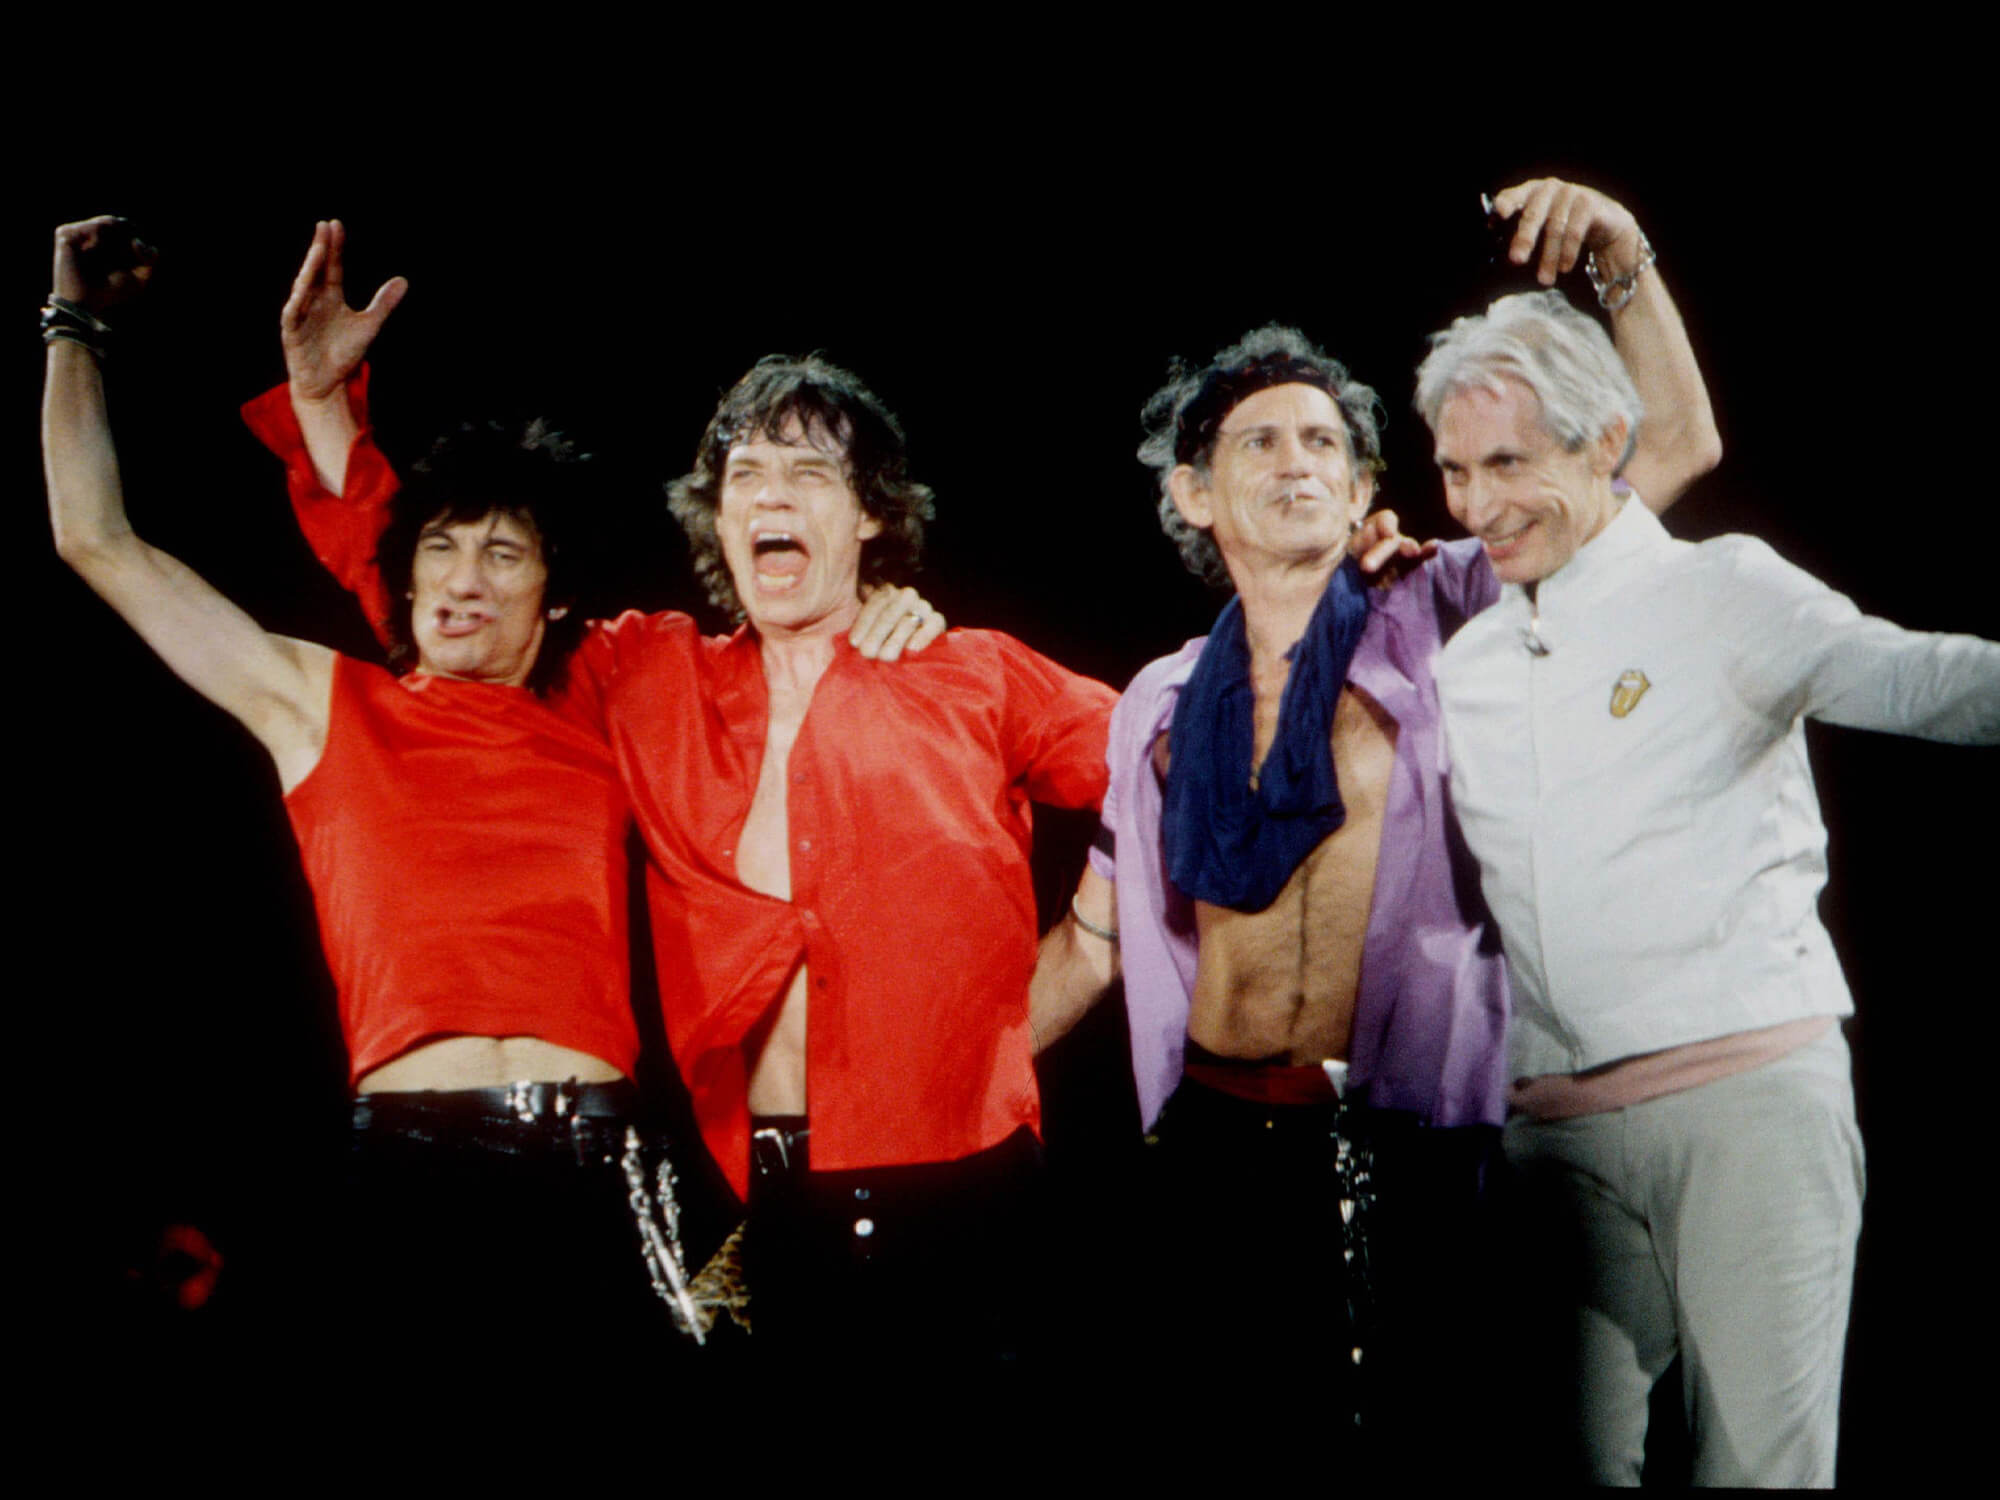 The Rolling Stones with their arms around each other on stage in 1998.